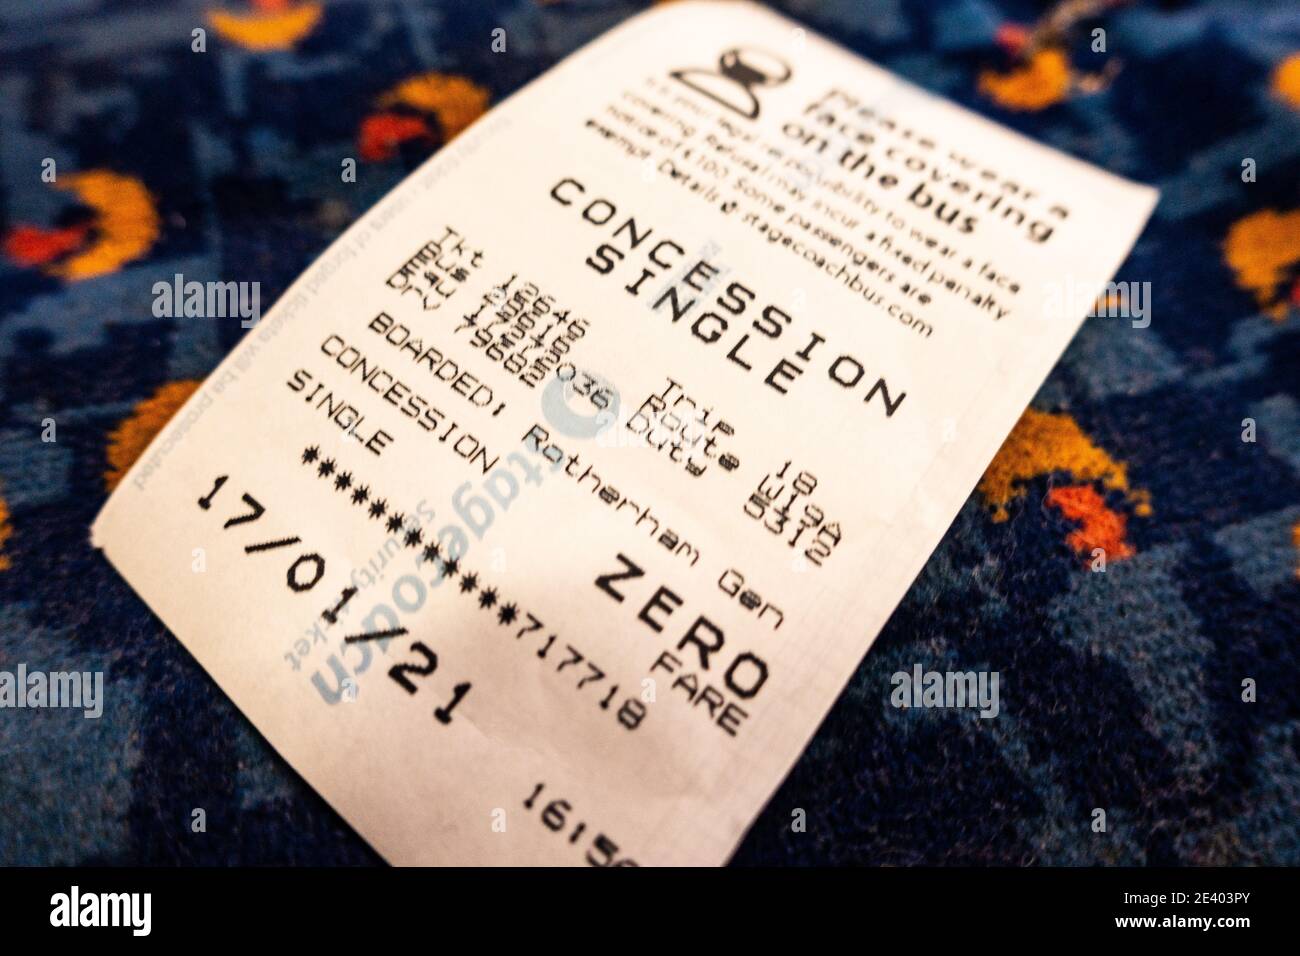 Old aged pensioners free bus pass ticket left on a bus seat Stock Photo